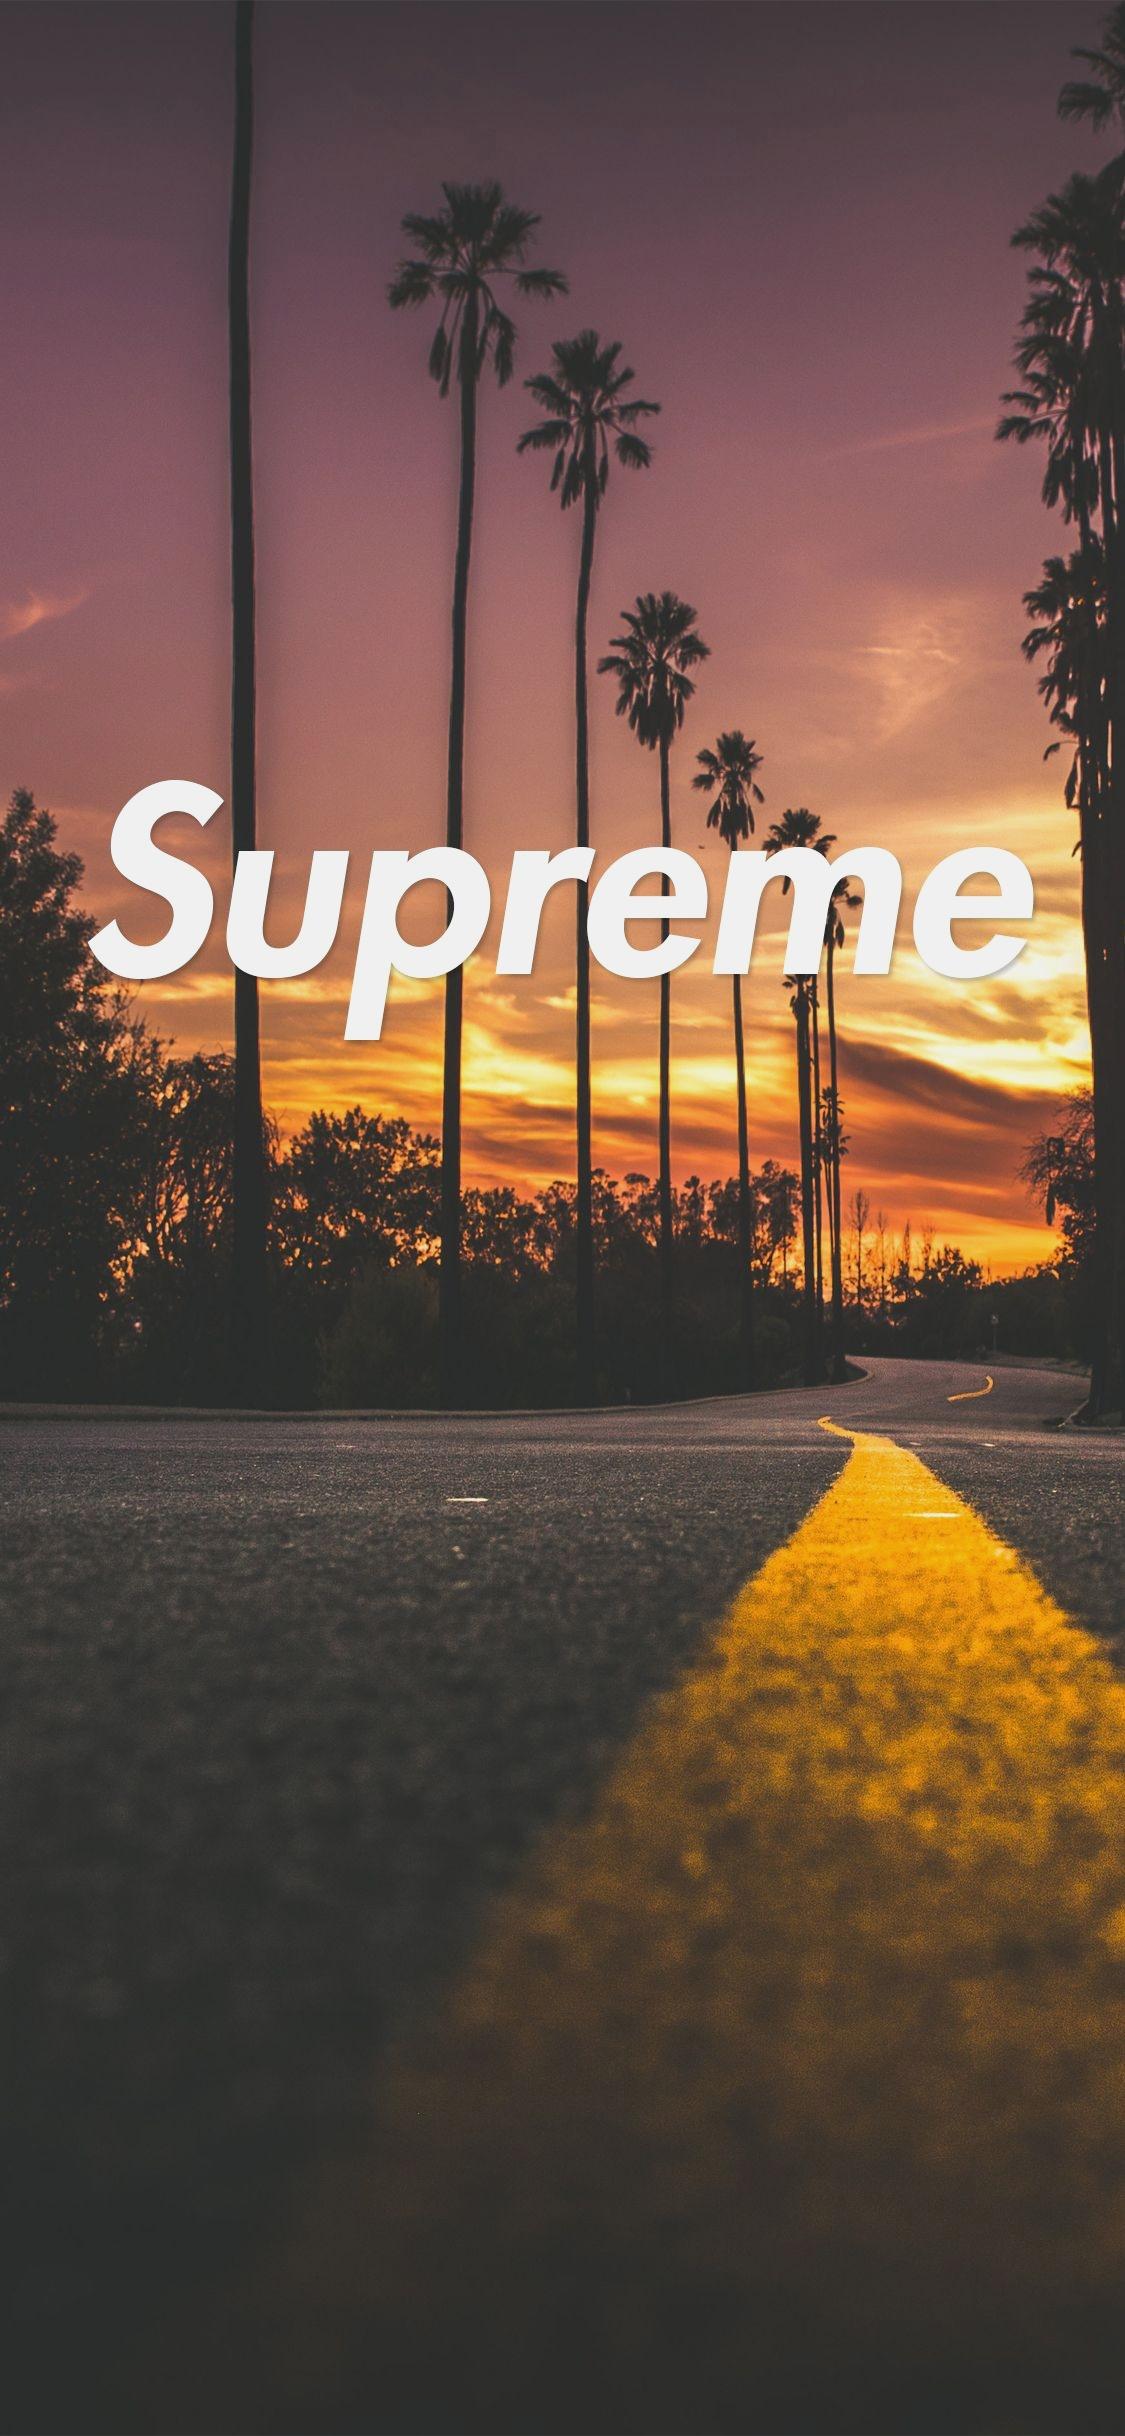 Free download Supreme Cool Wallpaper iPhone Cute Cool